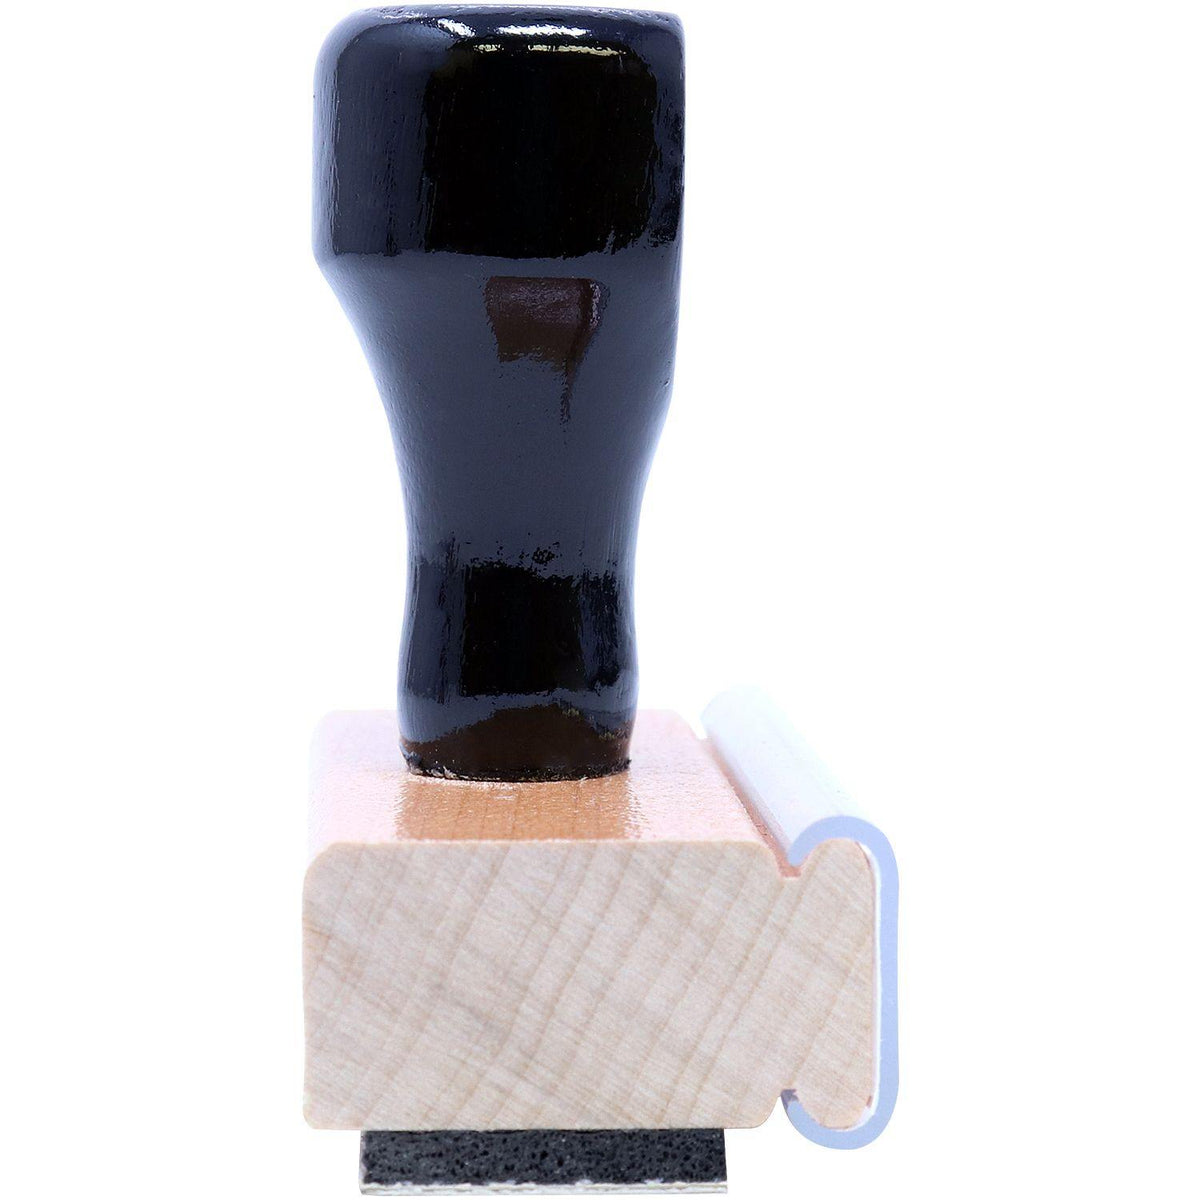 Side View of Large Faxed Rubber Stamp